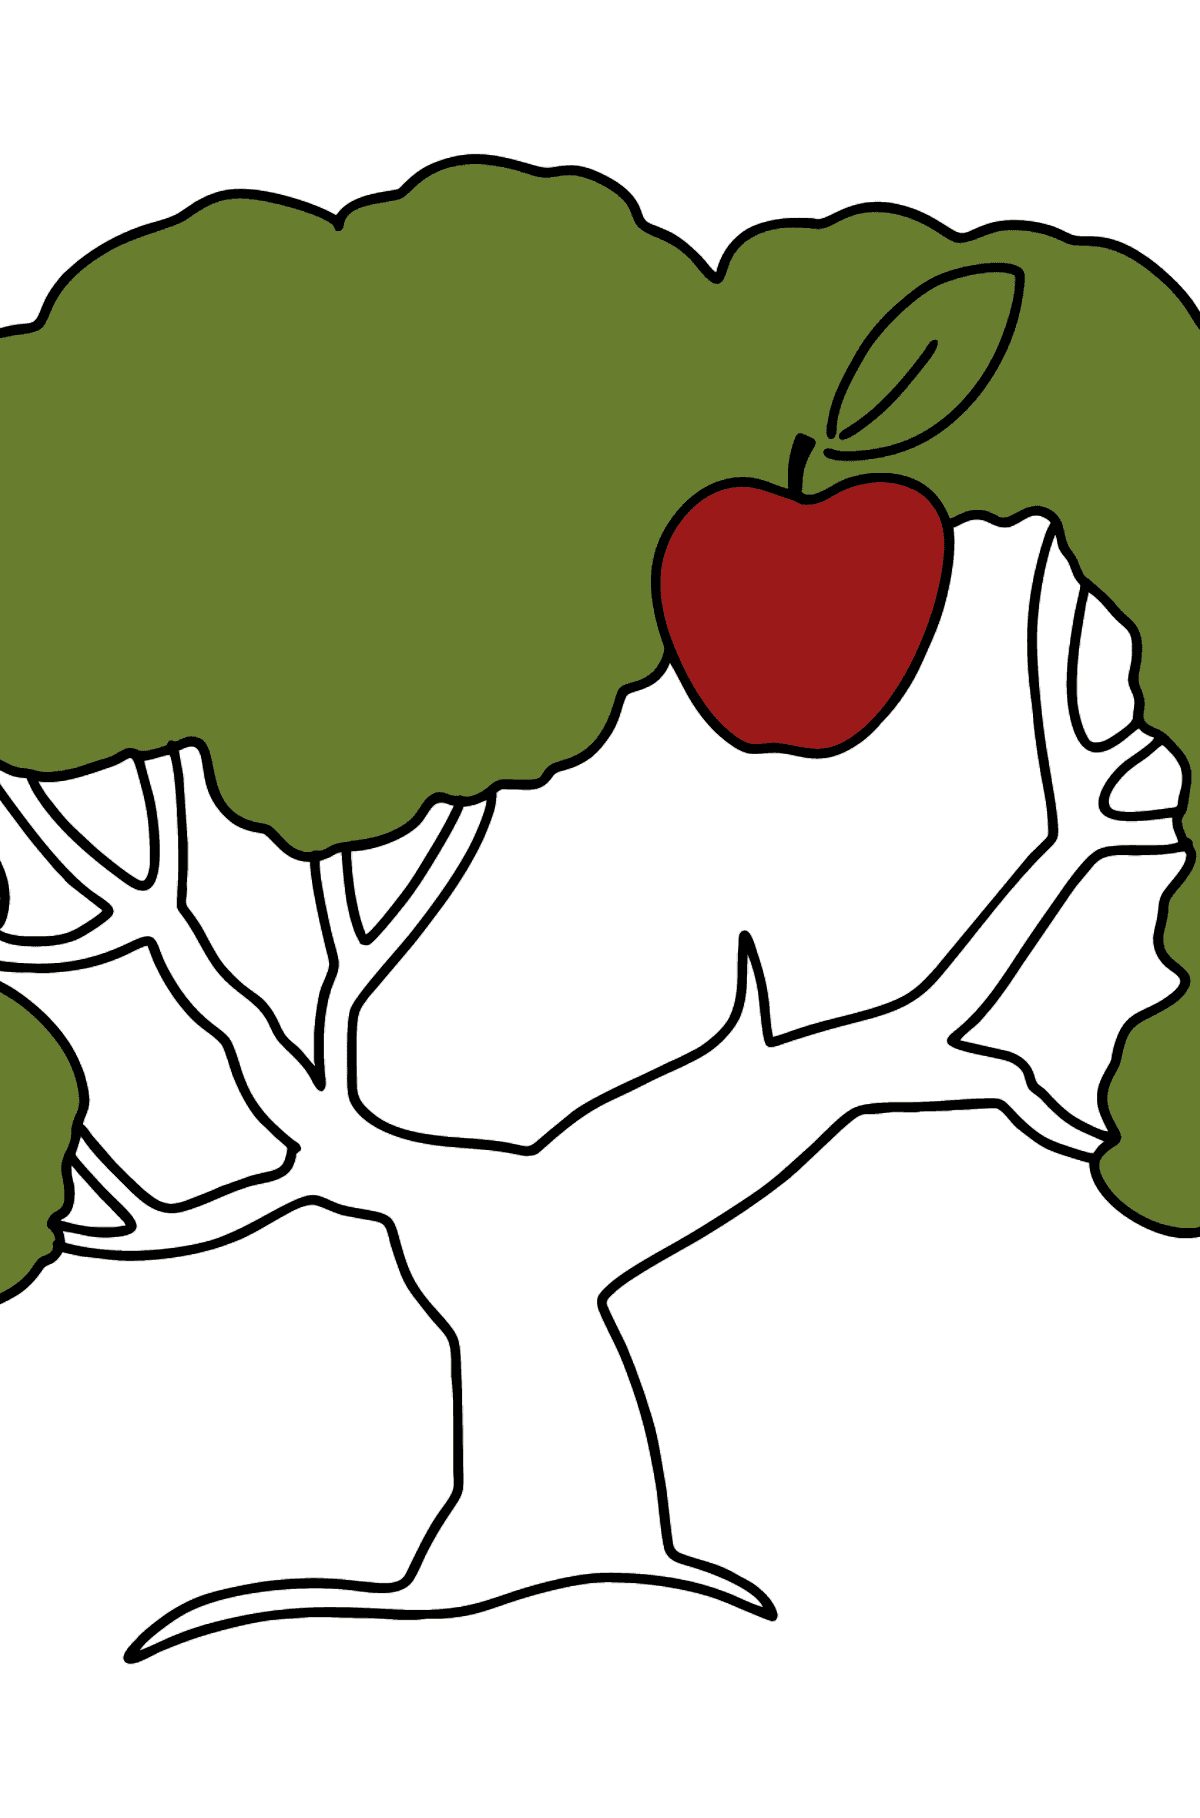 Apple Tree coloring page - simple - Coloring Pages for Kids